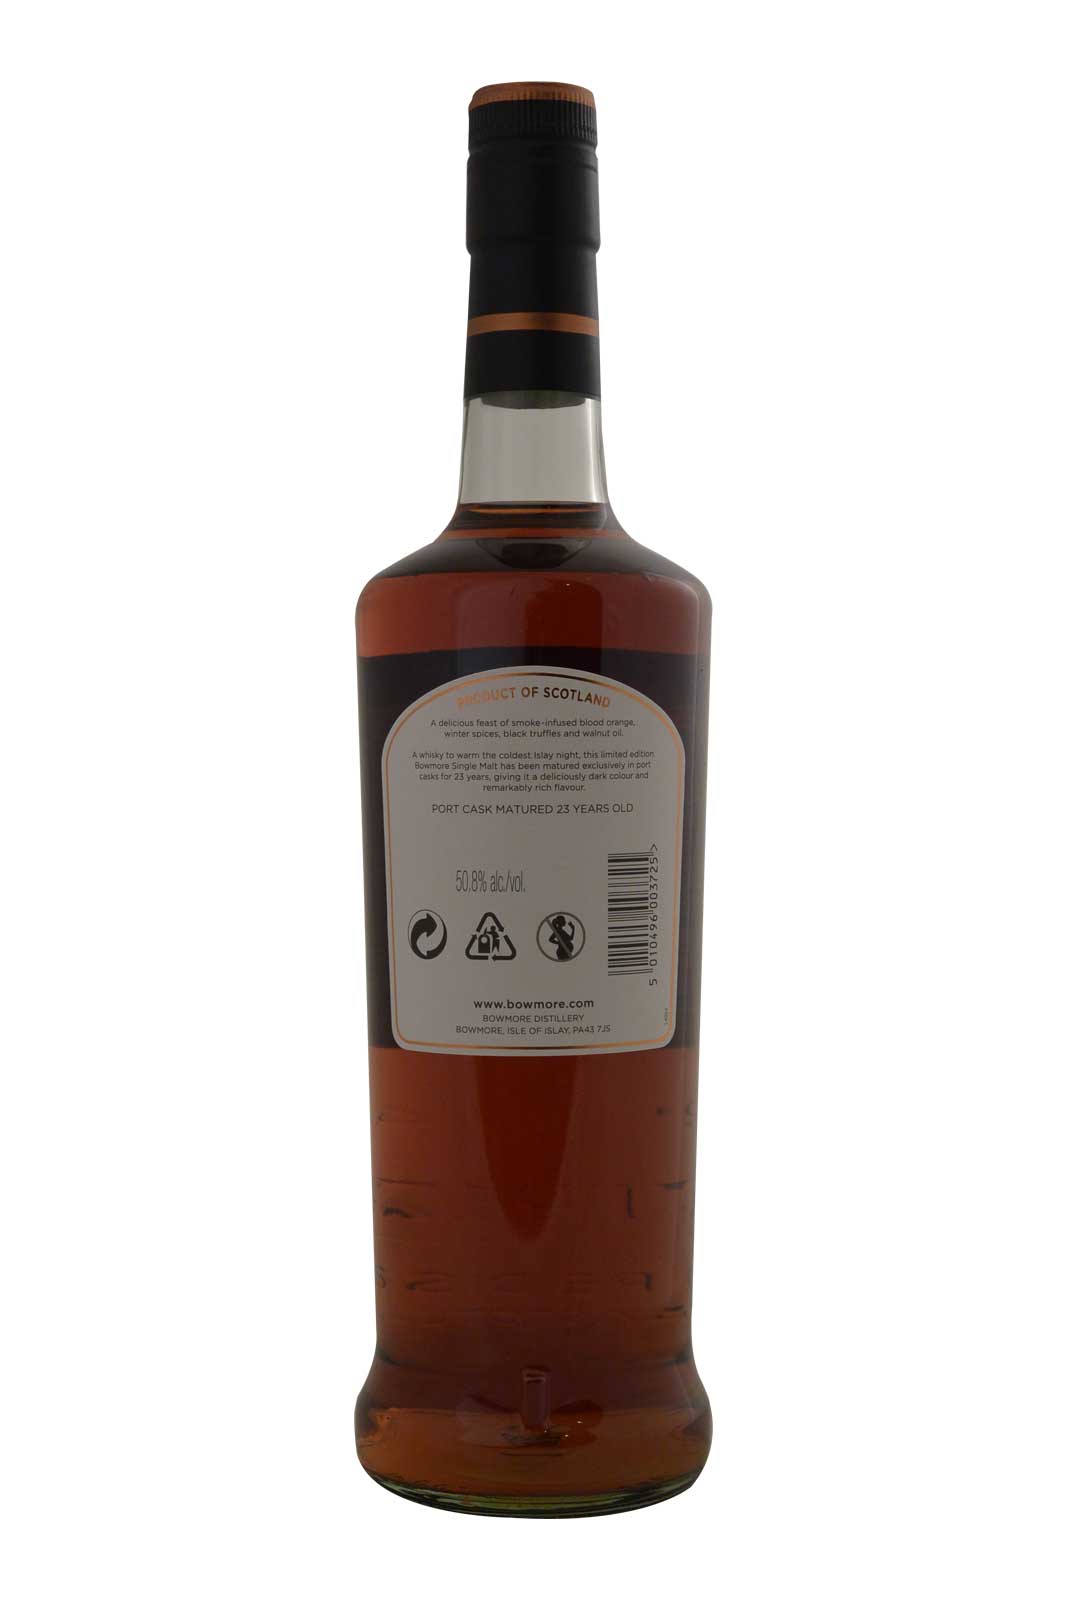 Bowmore 1989 23 Year Old Port Cask Matured